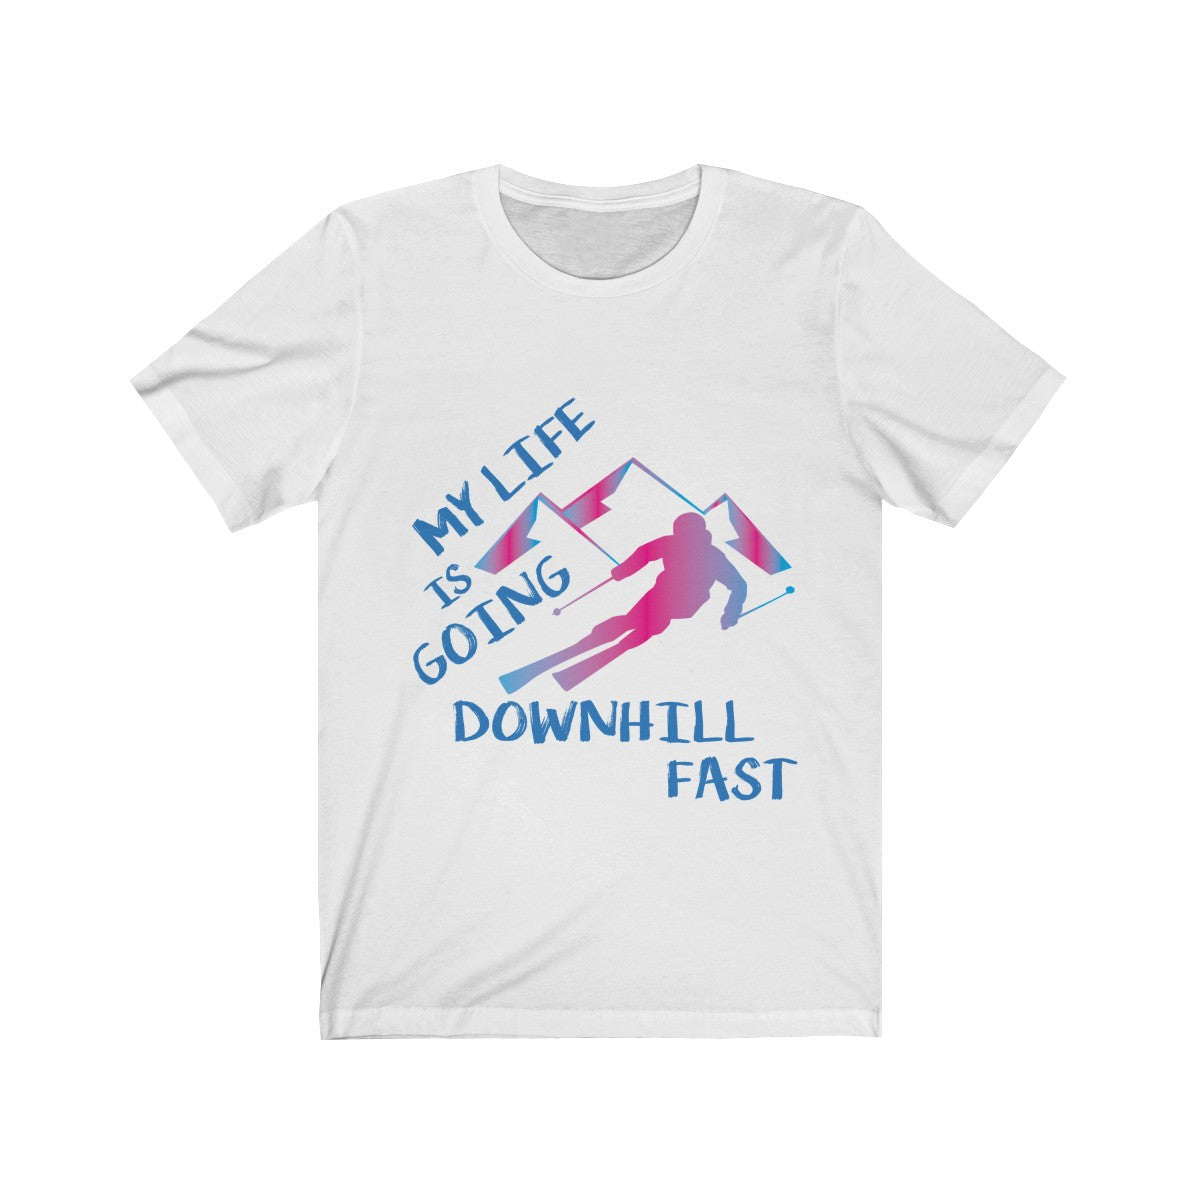 My Life is Going Downhill Fast Shirt, Funny Skiers Skiing I Love Alpine Ski Winter Sports Snow Vacation Slopes Freestyle Gift Starcove Fashion